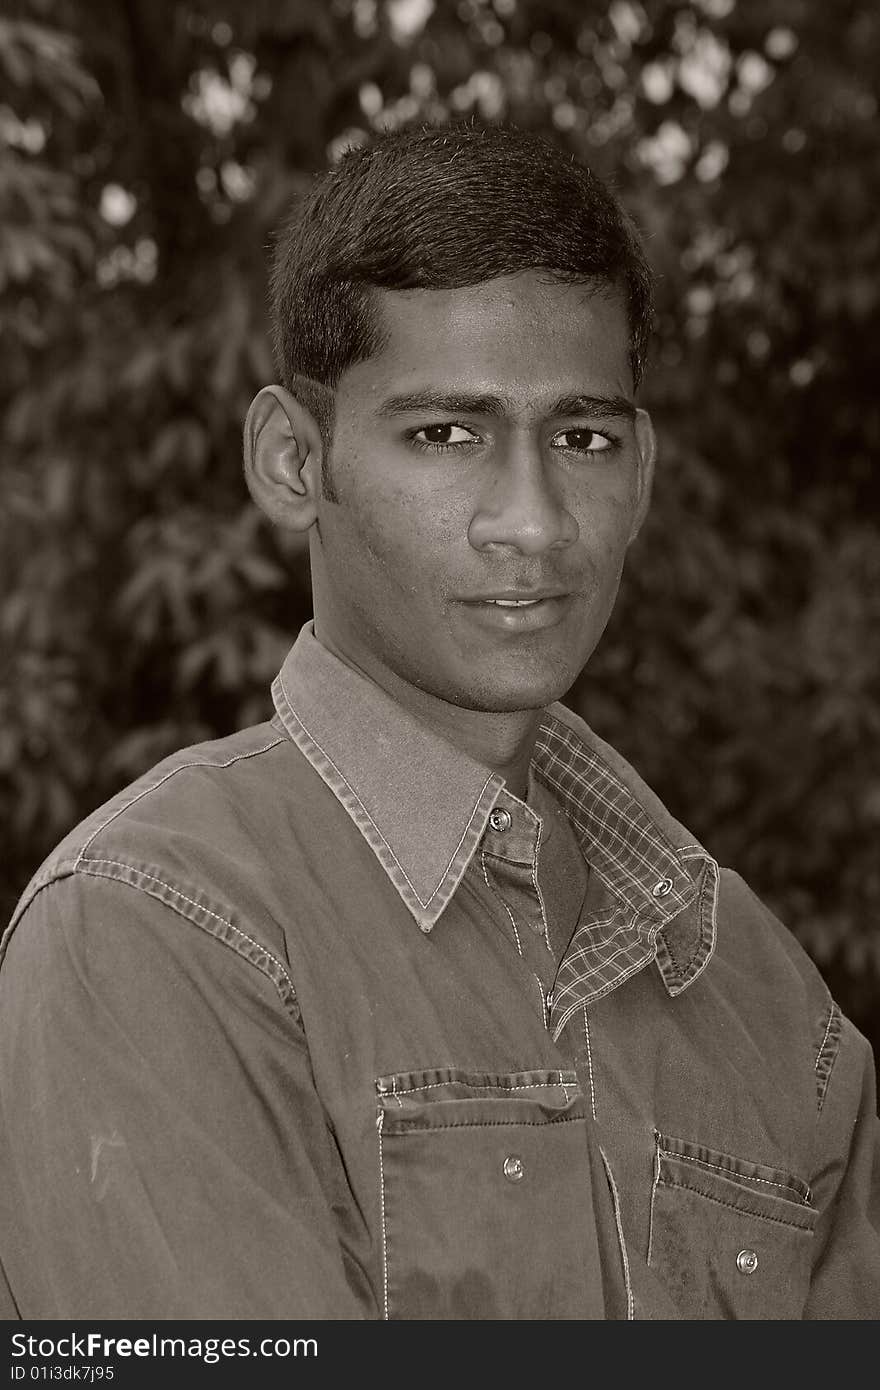 A young Indian man with sharp features.